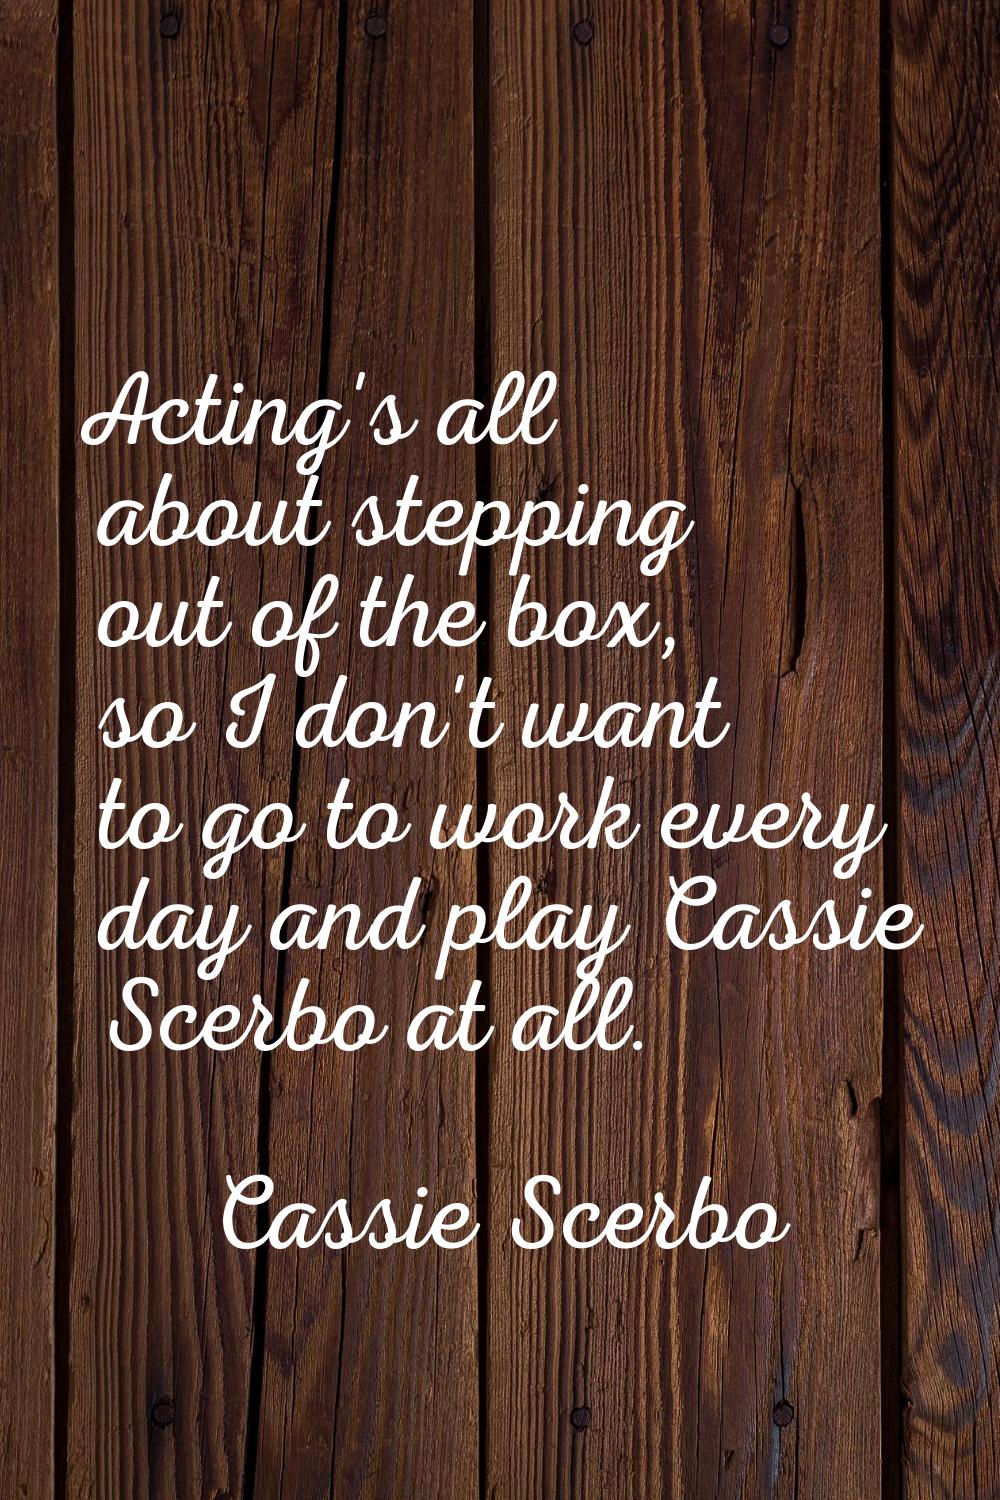 Acting's all about stepping out of the box, so I don't want to go to work every day and play Cassie